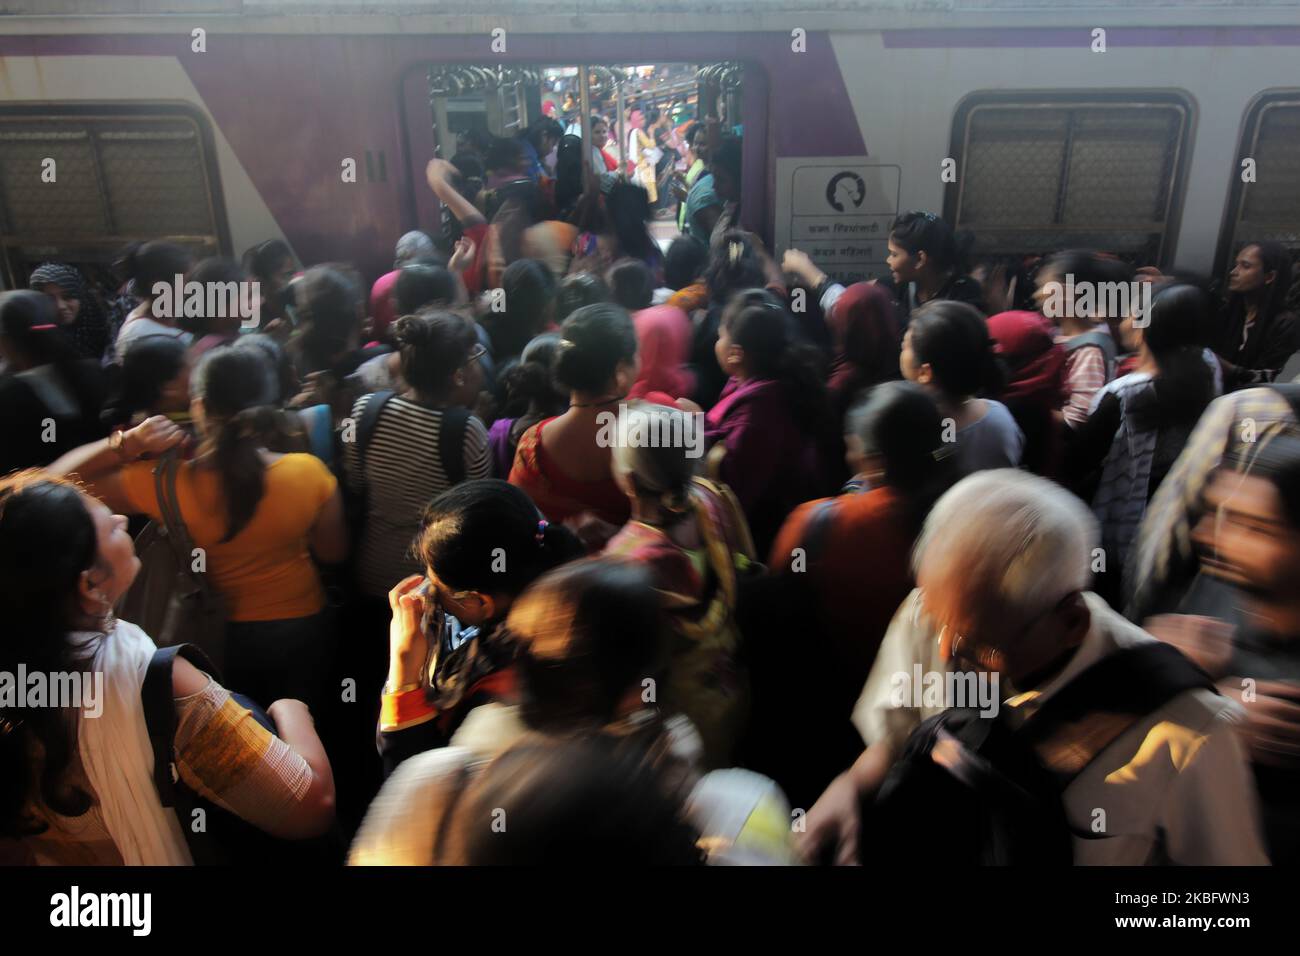 Commuters try to get onto an overcrowded train at a railway station in Mumbai, India on 31 January 2020. (Photo by Himanshu Bhatt/NurPhoto) Stock Photo